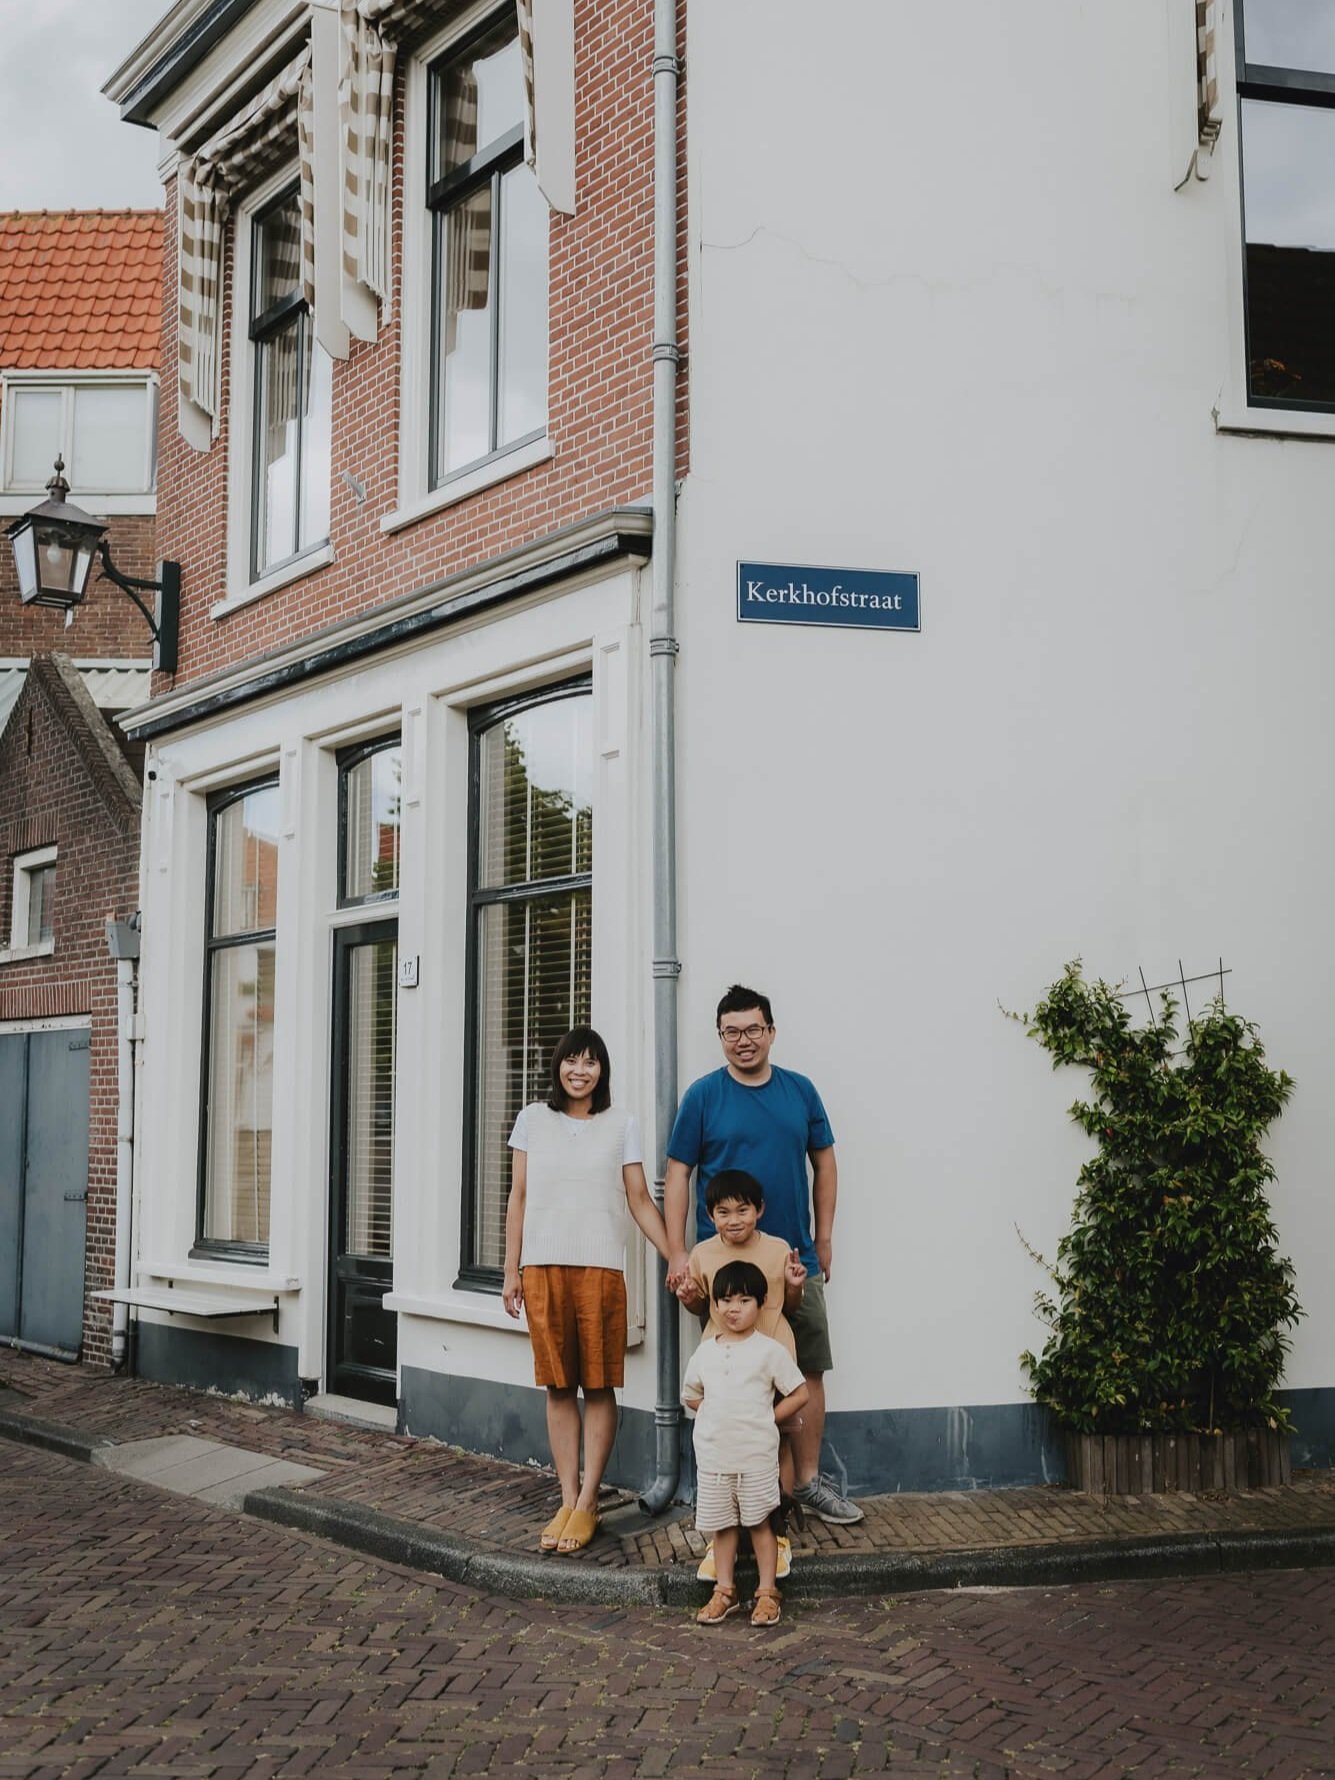 Family Photoshoot in Haarlem, the Netherlands